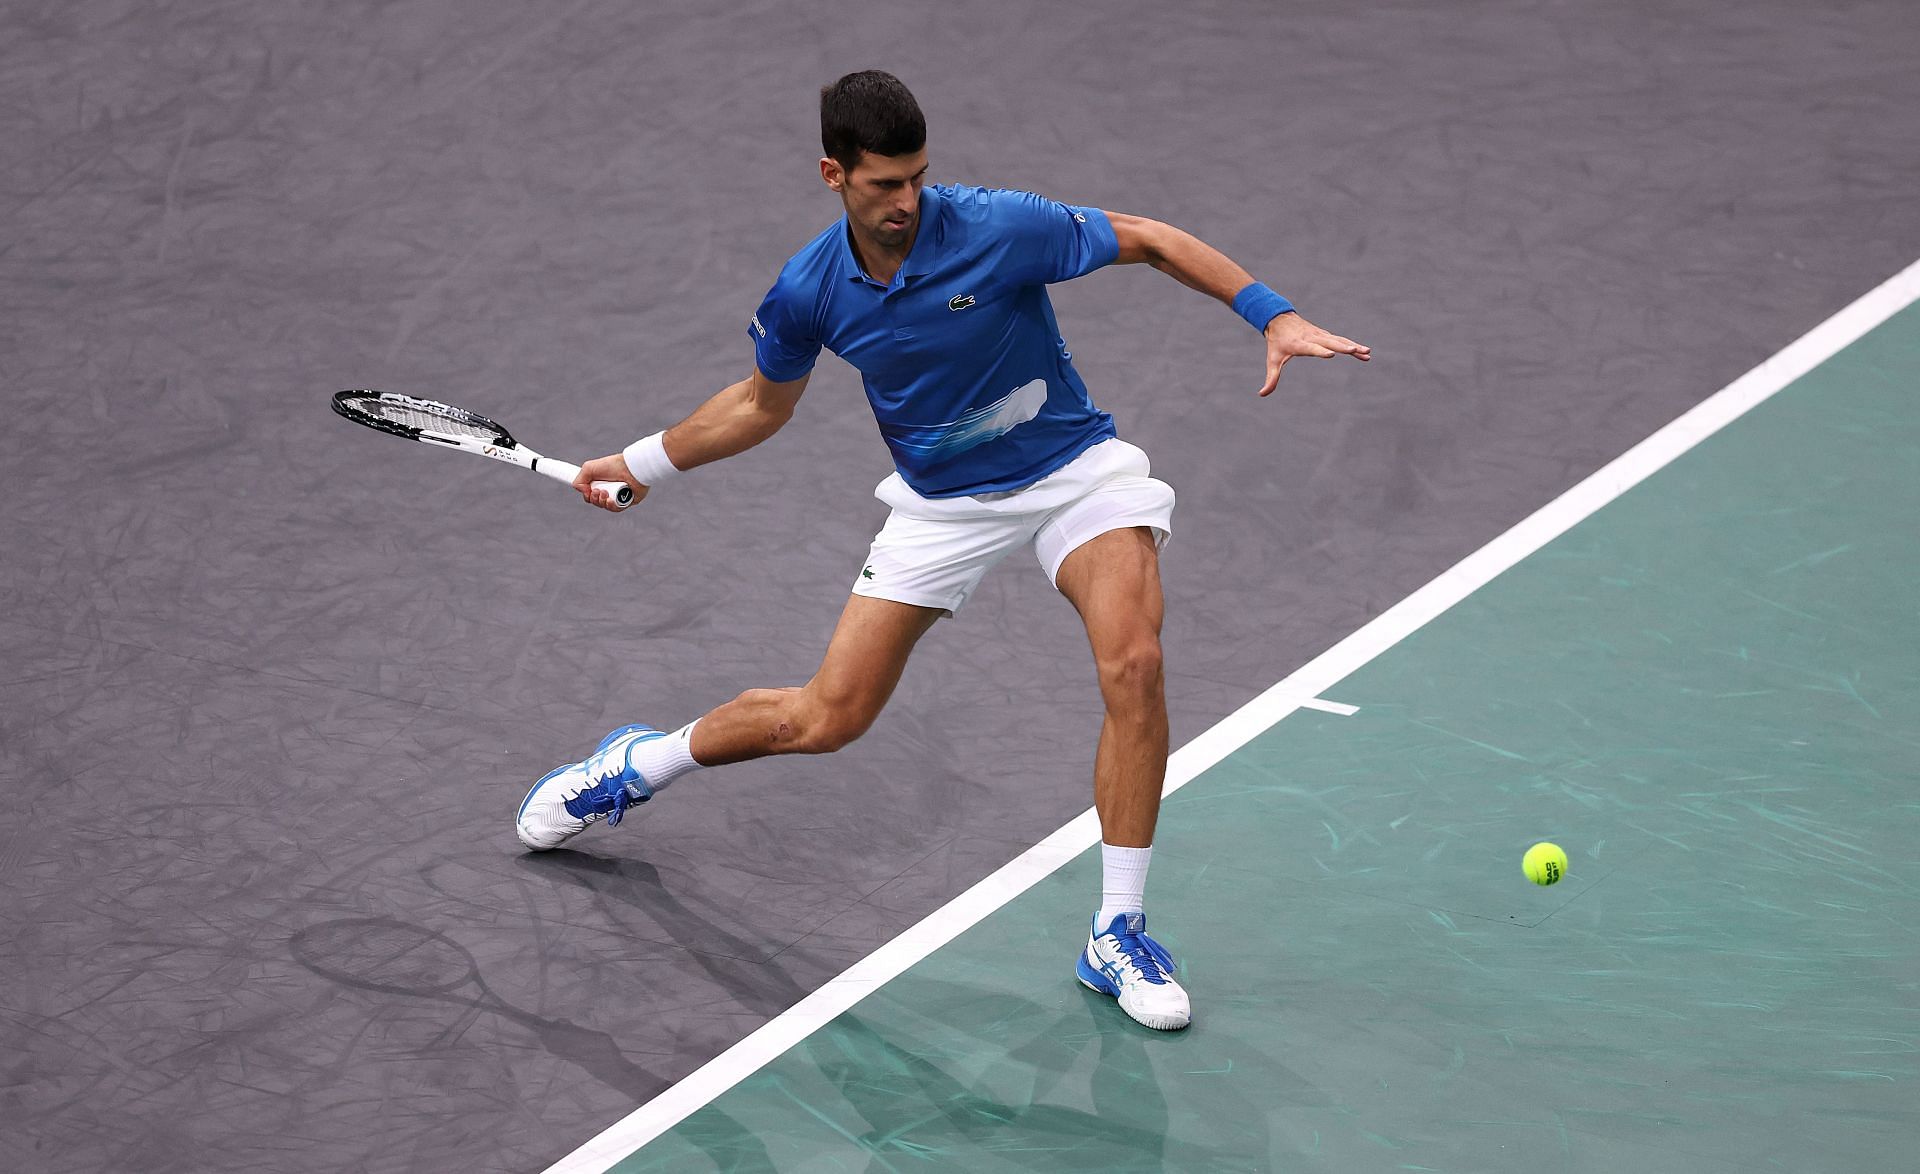 Novak Djokovic in action against Maxime Cressy at the Rolex Paris Masters - Day Two